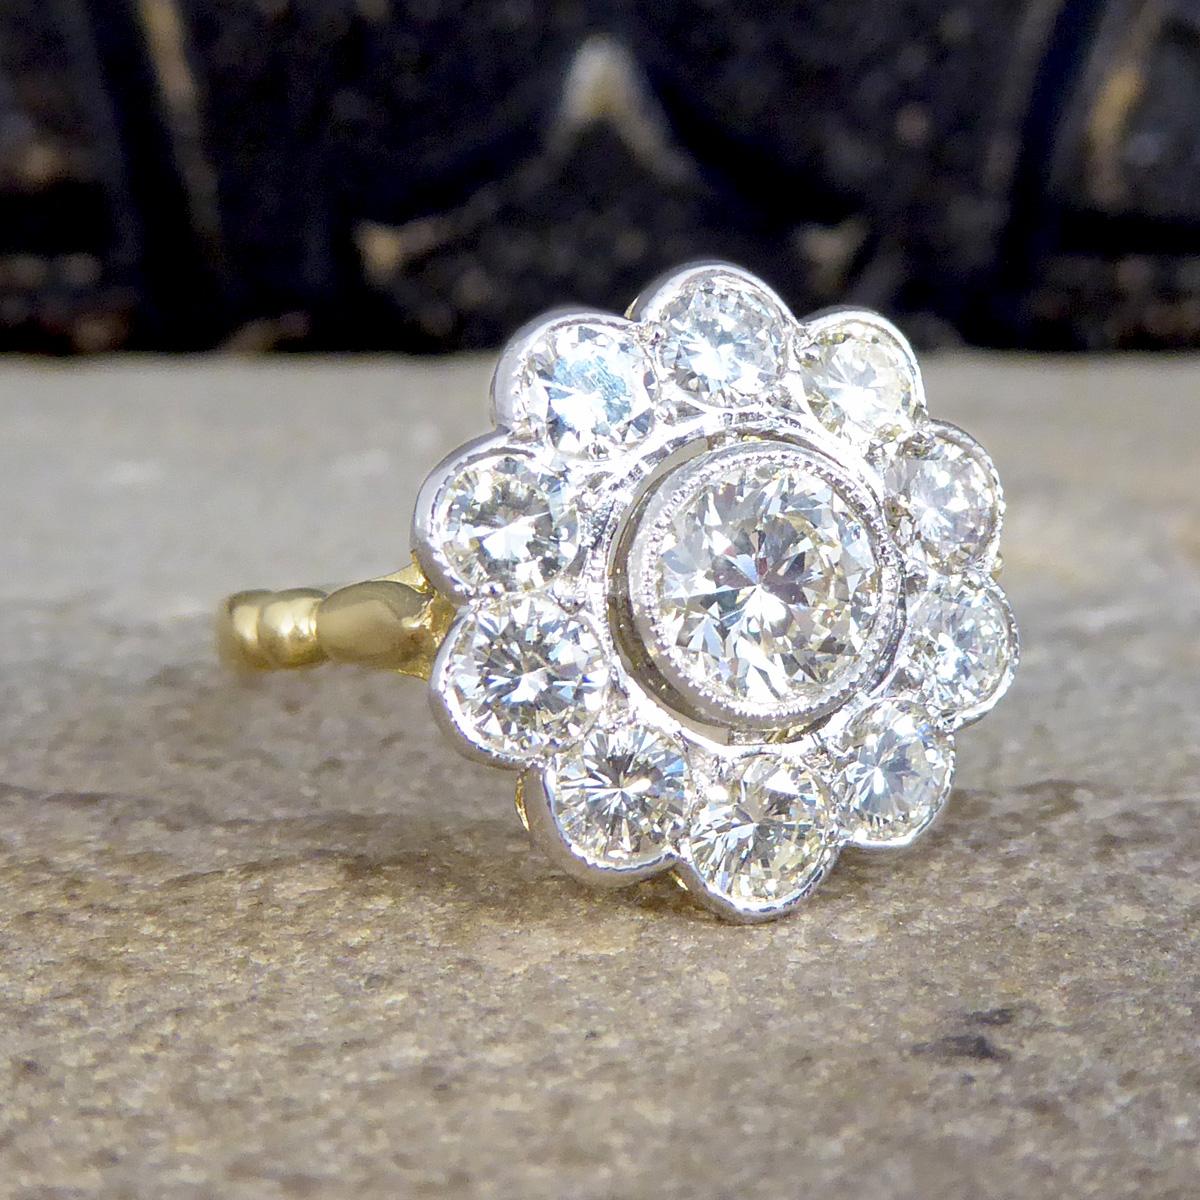 Such a stunning contemporary Daisy cluster ring has been made to resemble a 1920's style ring. It is set with Round Brilliant cut Diamonds giving it a total carat weight of 1.85ct with the centre being the largest with 8 surrounding stones with a